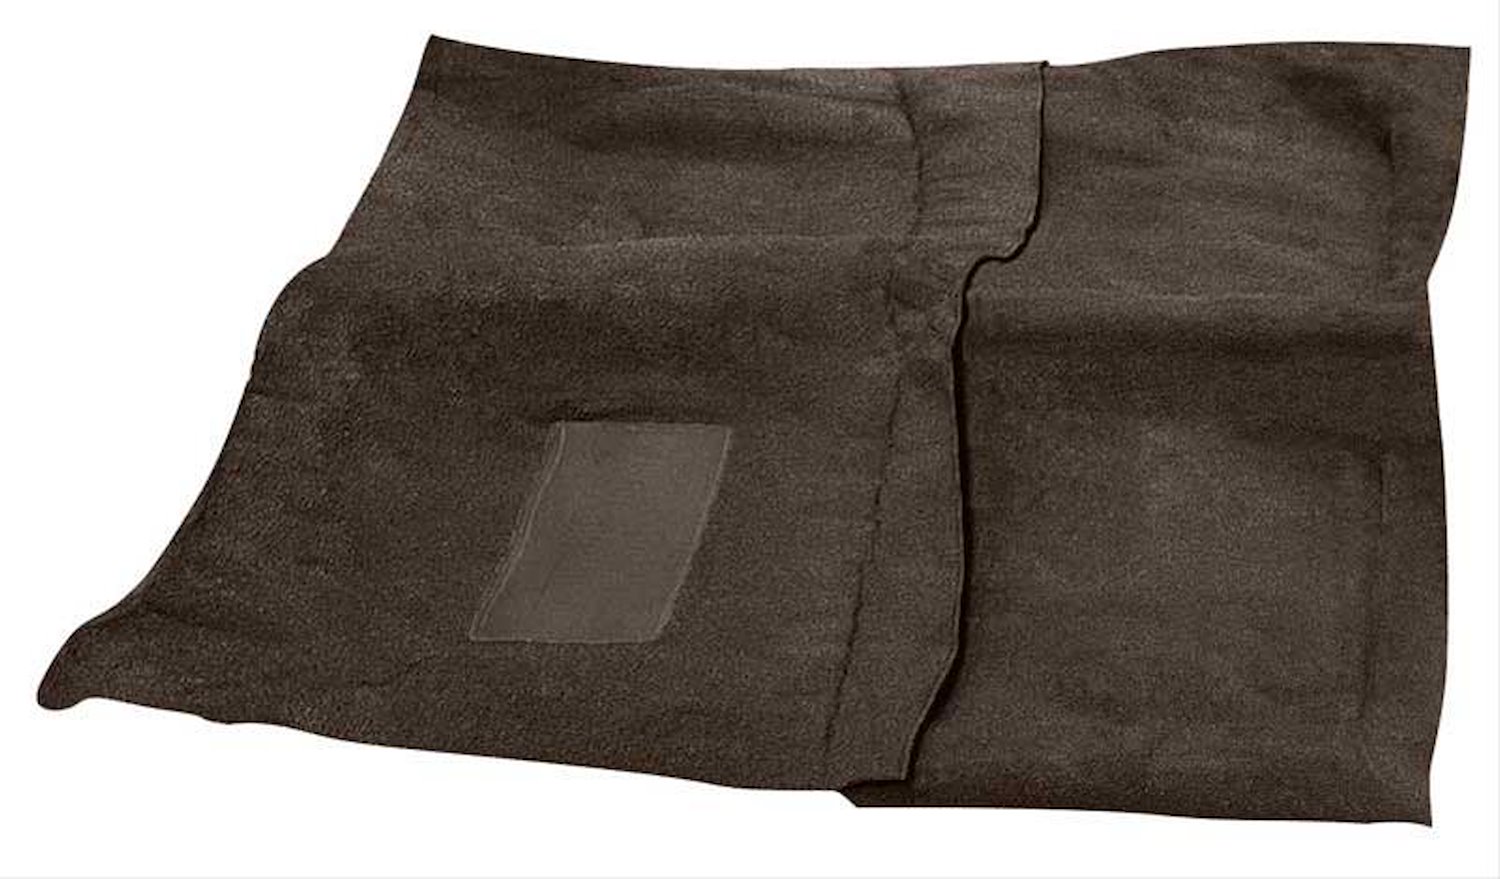 MA530510 Loop Carpet With Tails 1968 Dodge Dart Convertible With 4-Speed Dark Brown